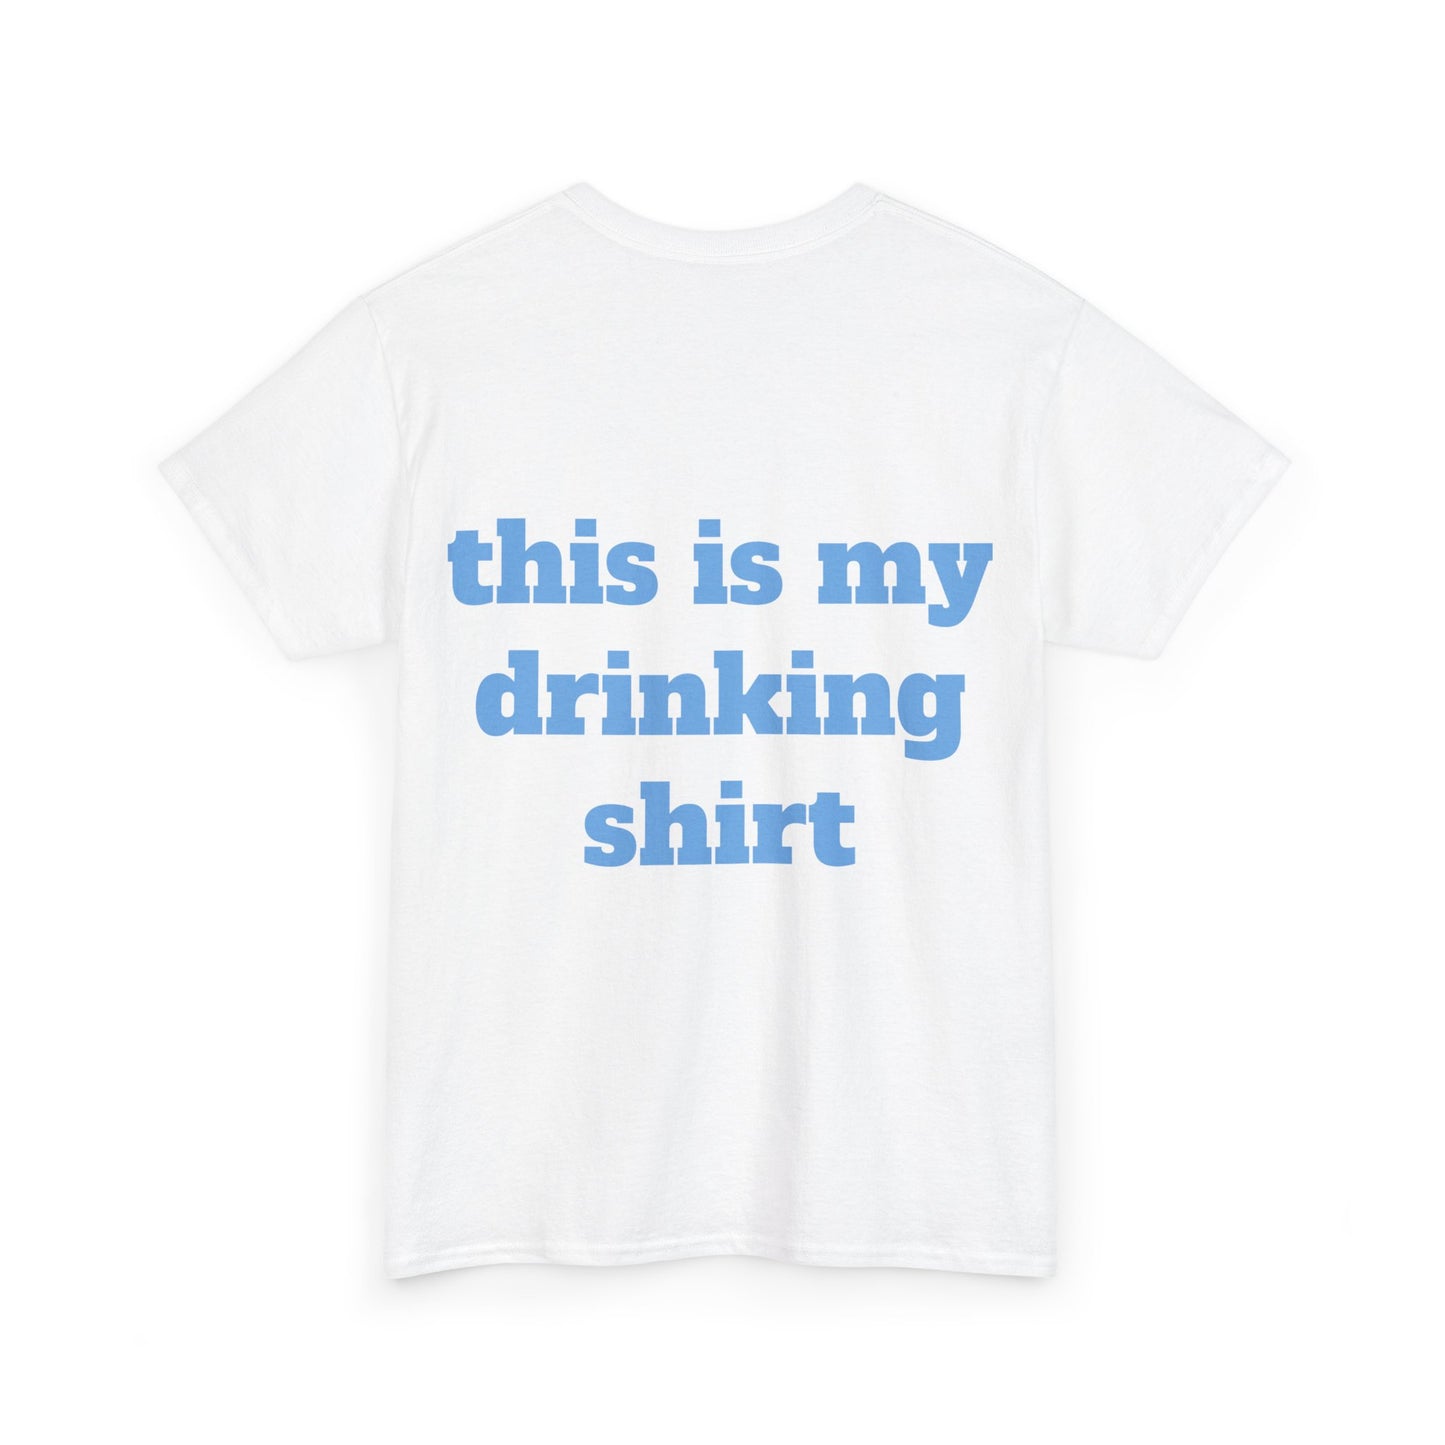 This is my drinking/driving shirt